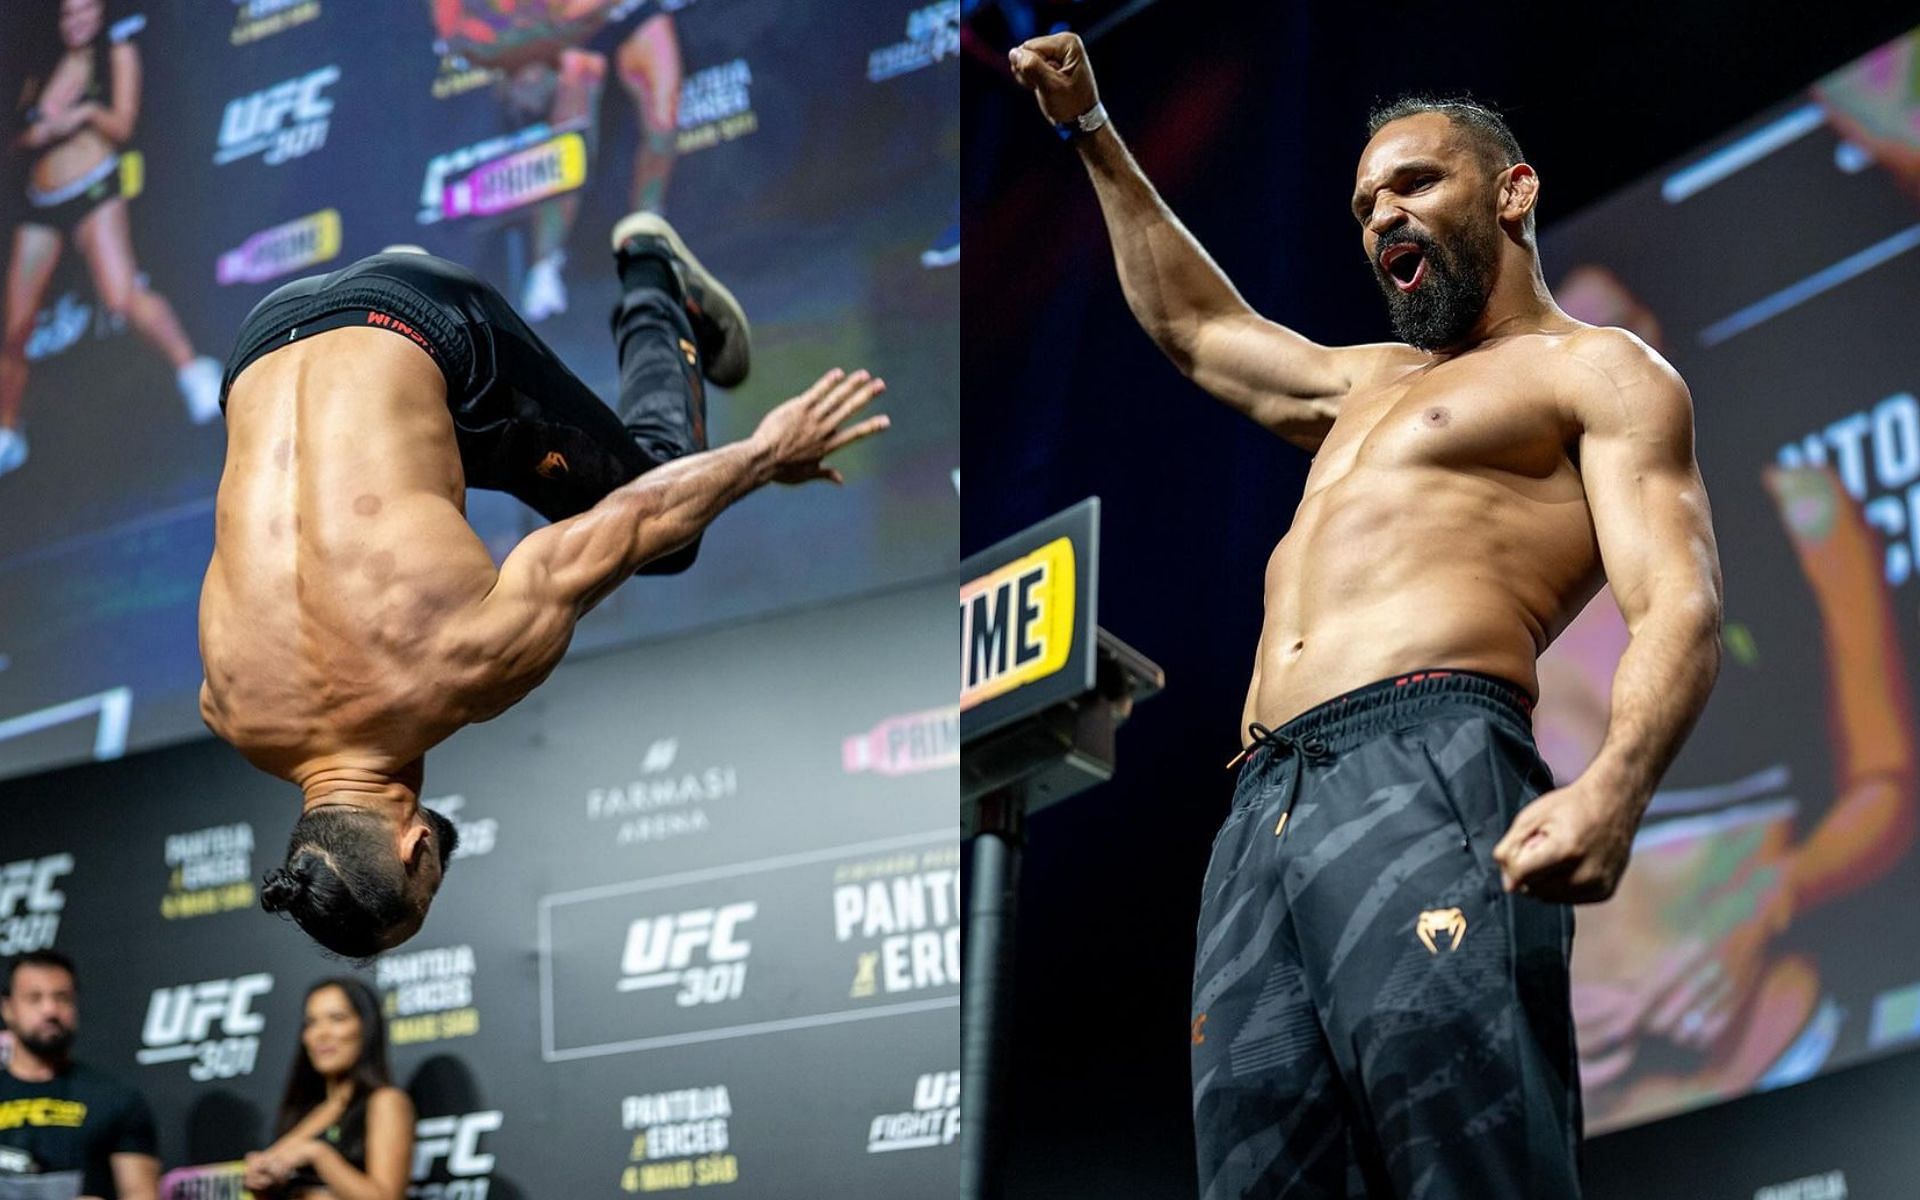 An adrenaline filled Michel Pereira before his fight at UFC 301 [Images courtesy of @michelpereira on Instagram]